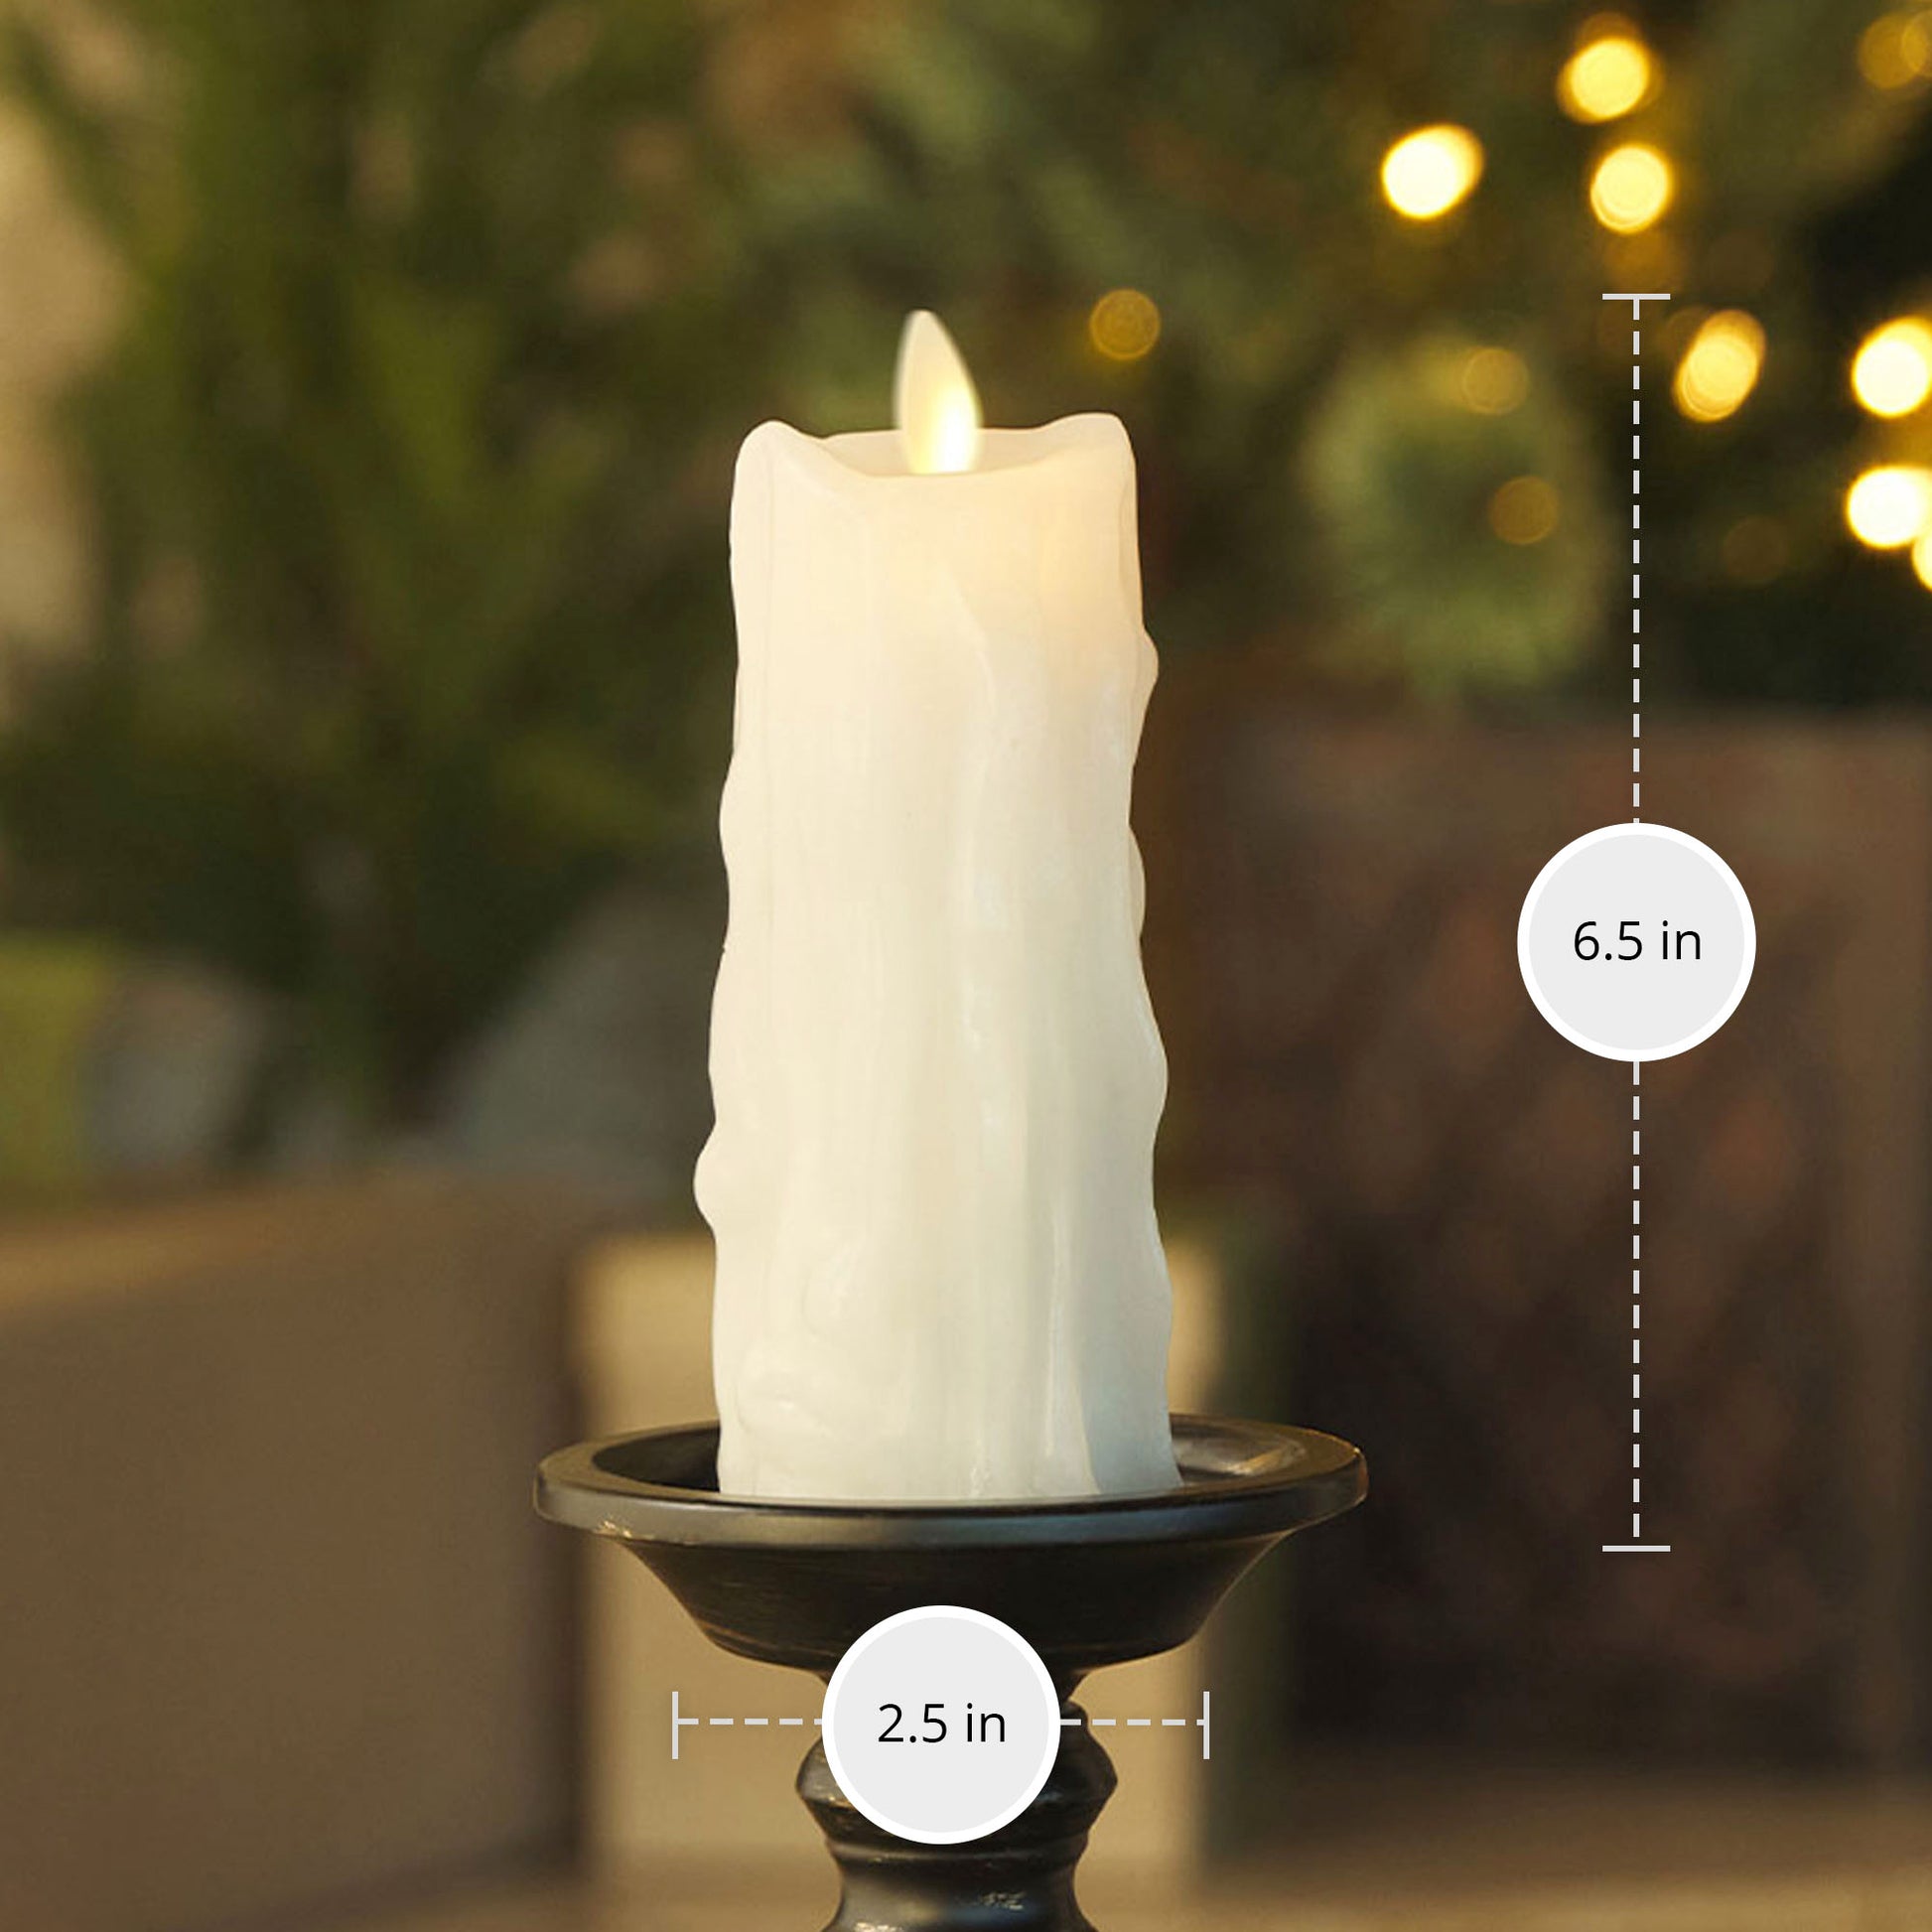 These Flameless Candles Add Vintage Nostalgia To The Christmas Tree